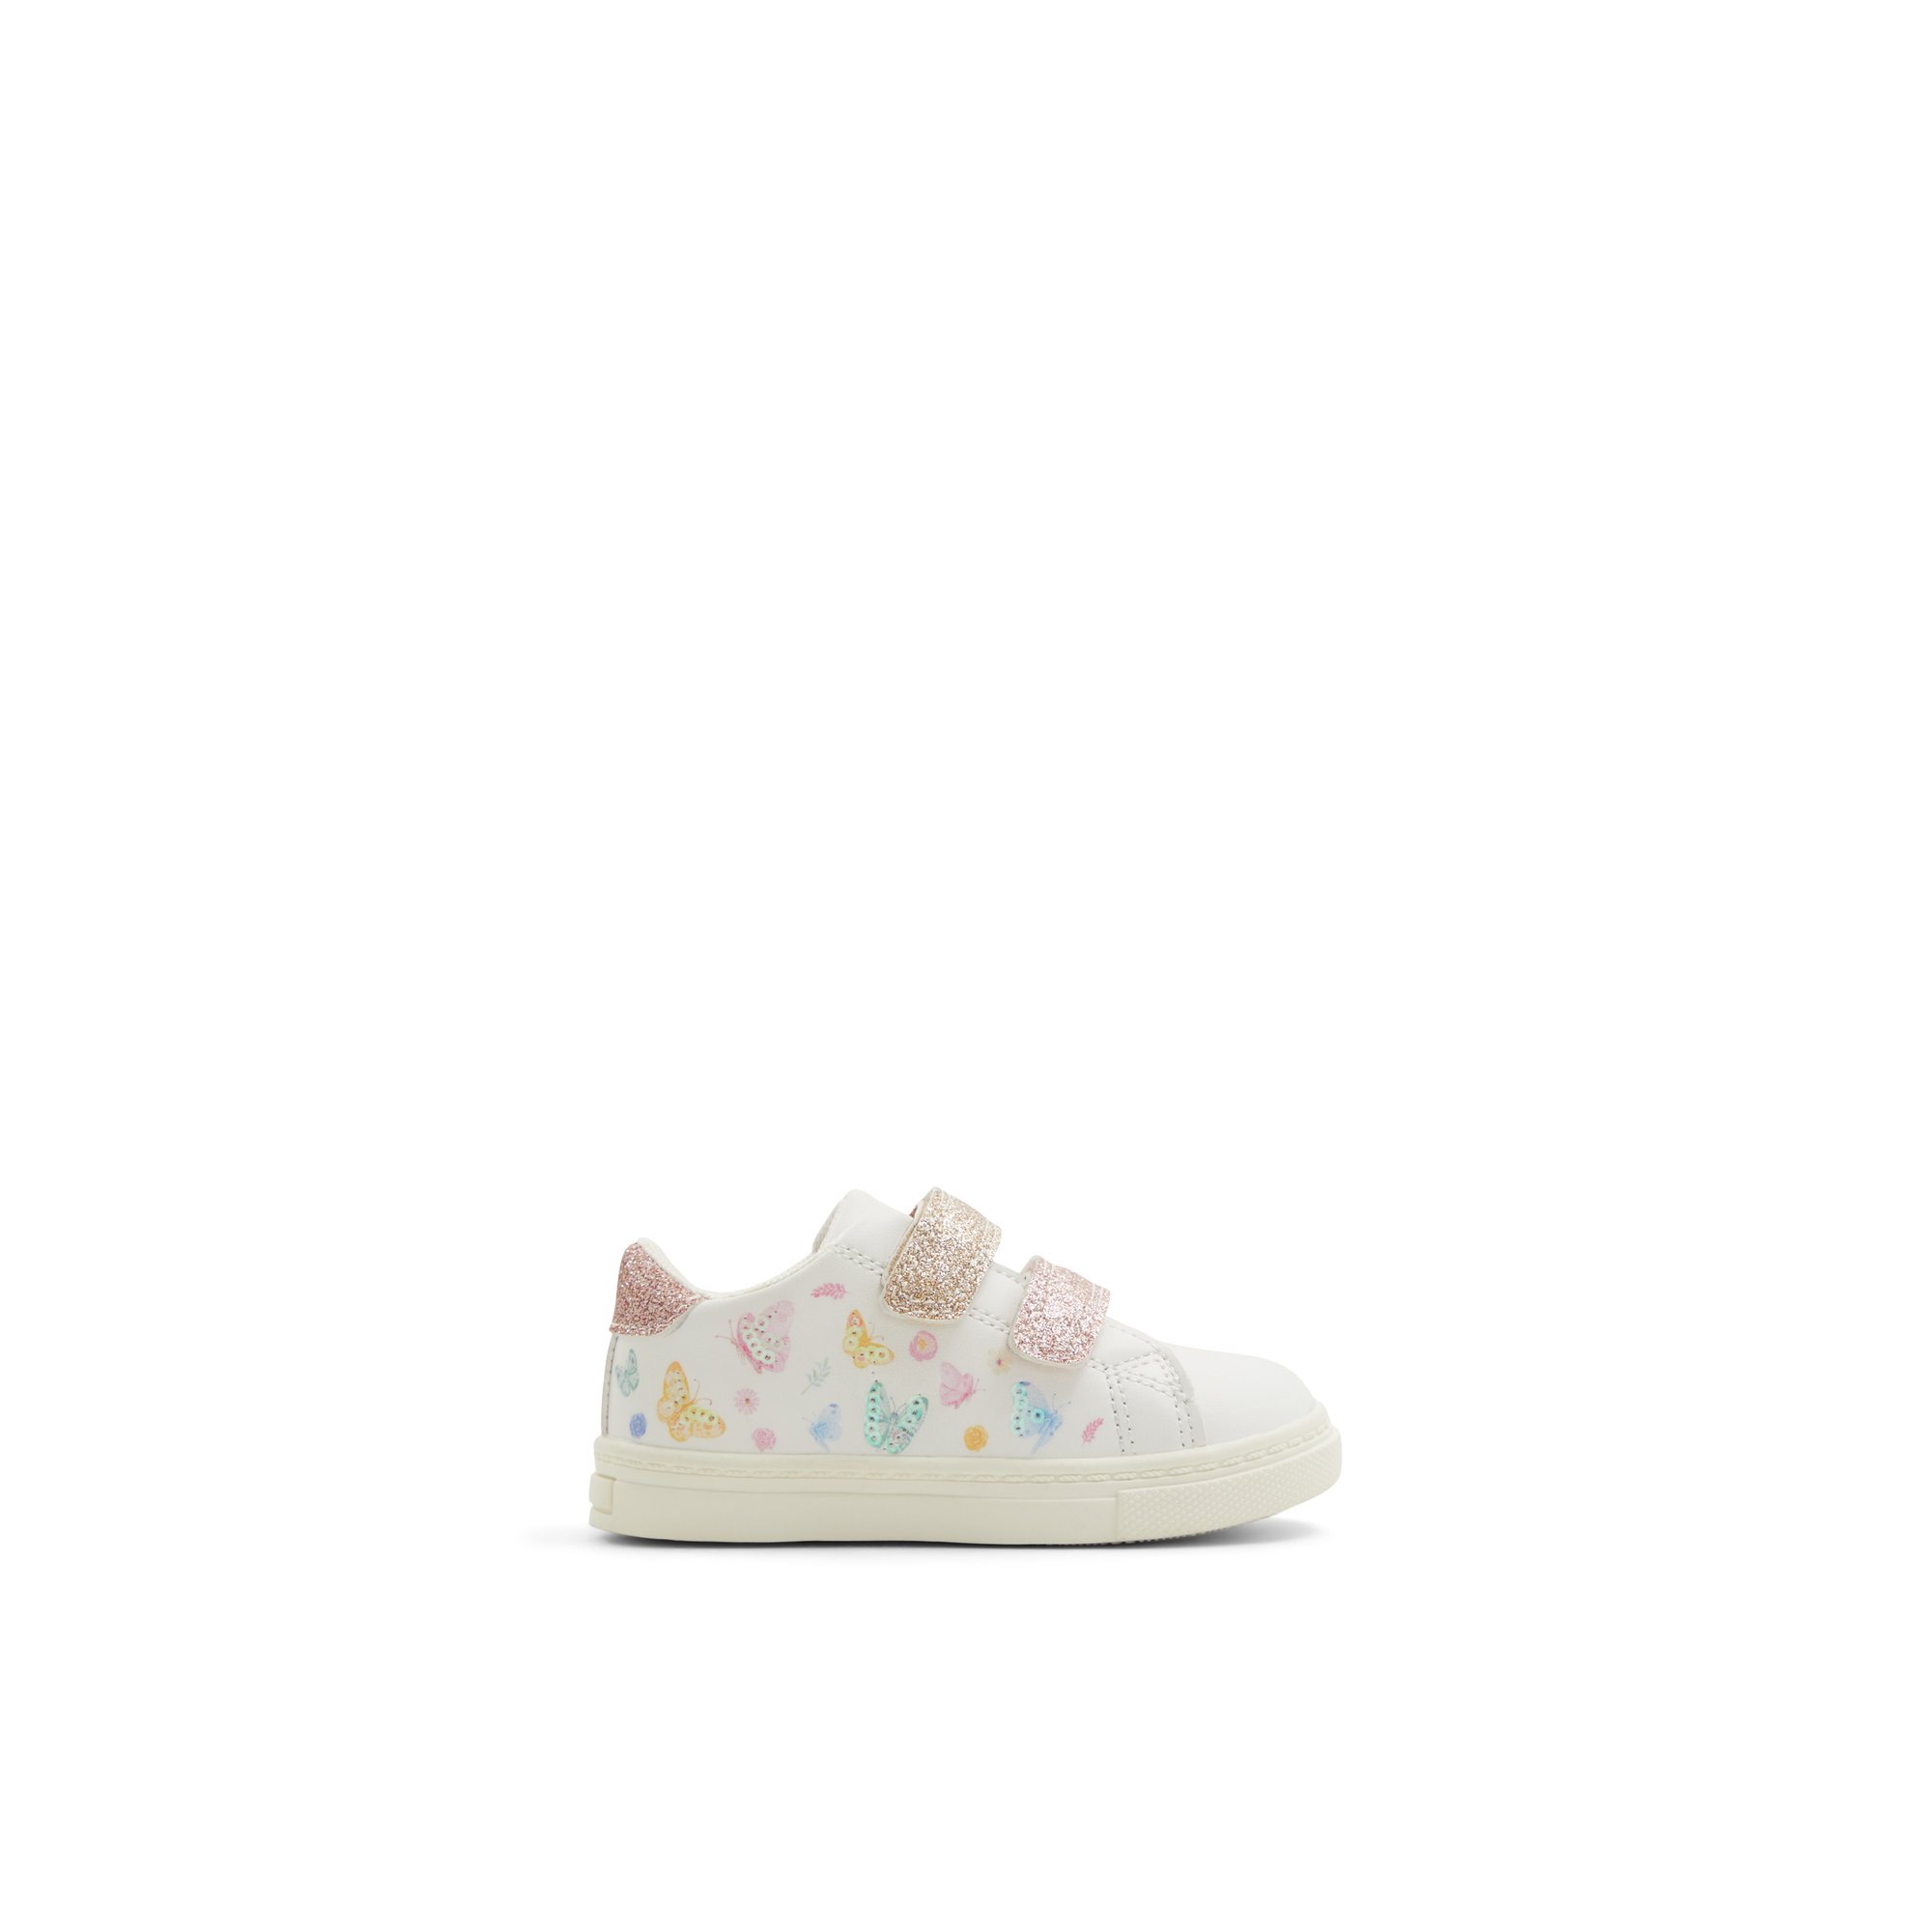 No Angel Lucy-ig - Kids Girls Toddler Shoes White